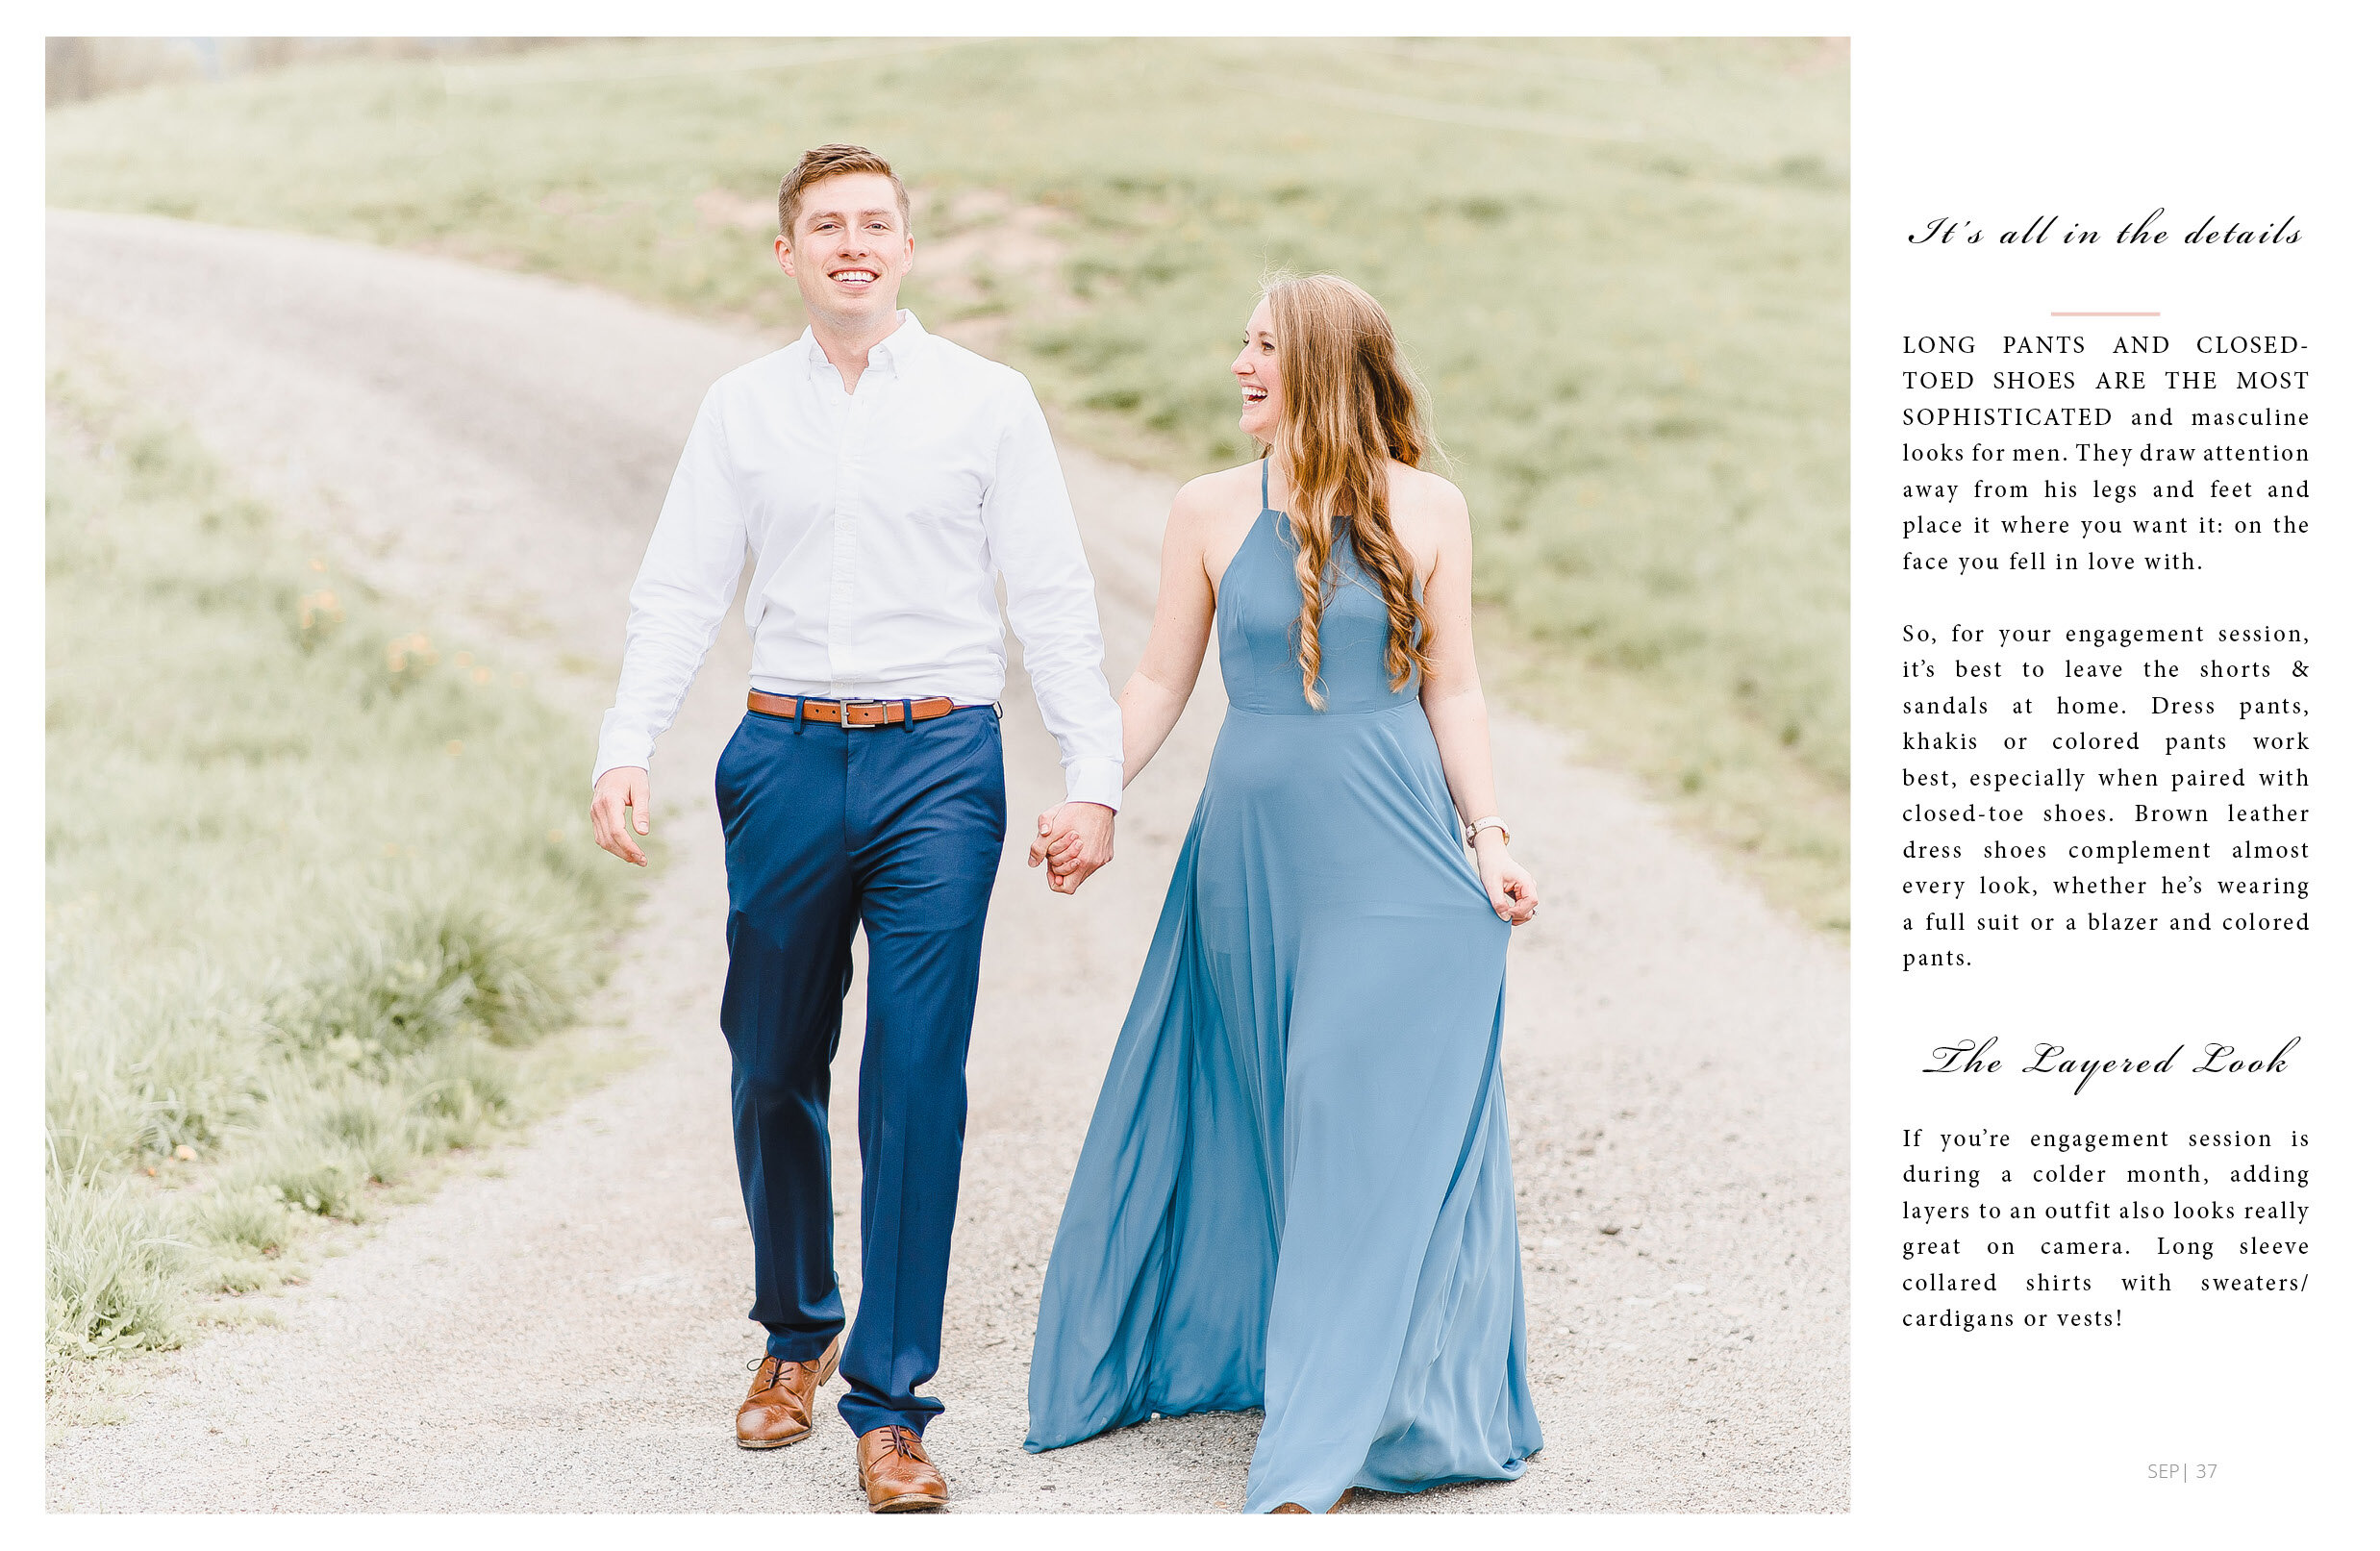 Engagement Session Style Guide19.jpg